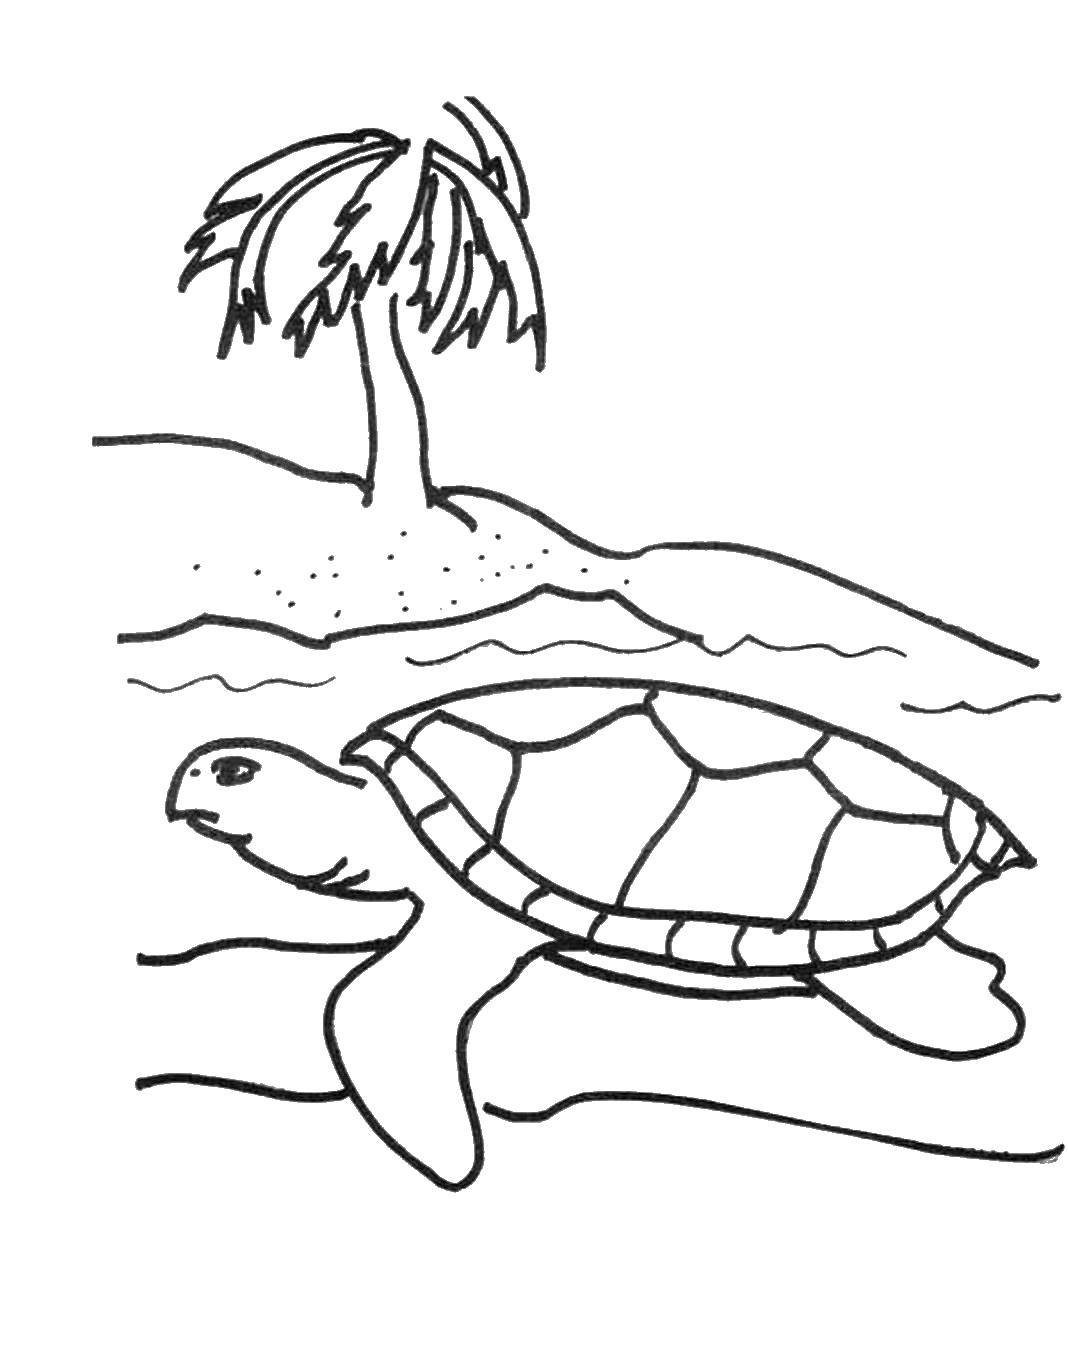 Coloring Sea turtle. Category Animals. Tags:  Reptile, turtle.